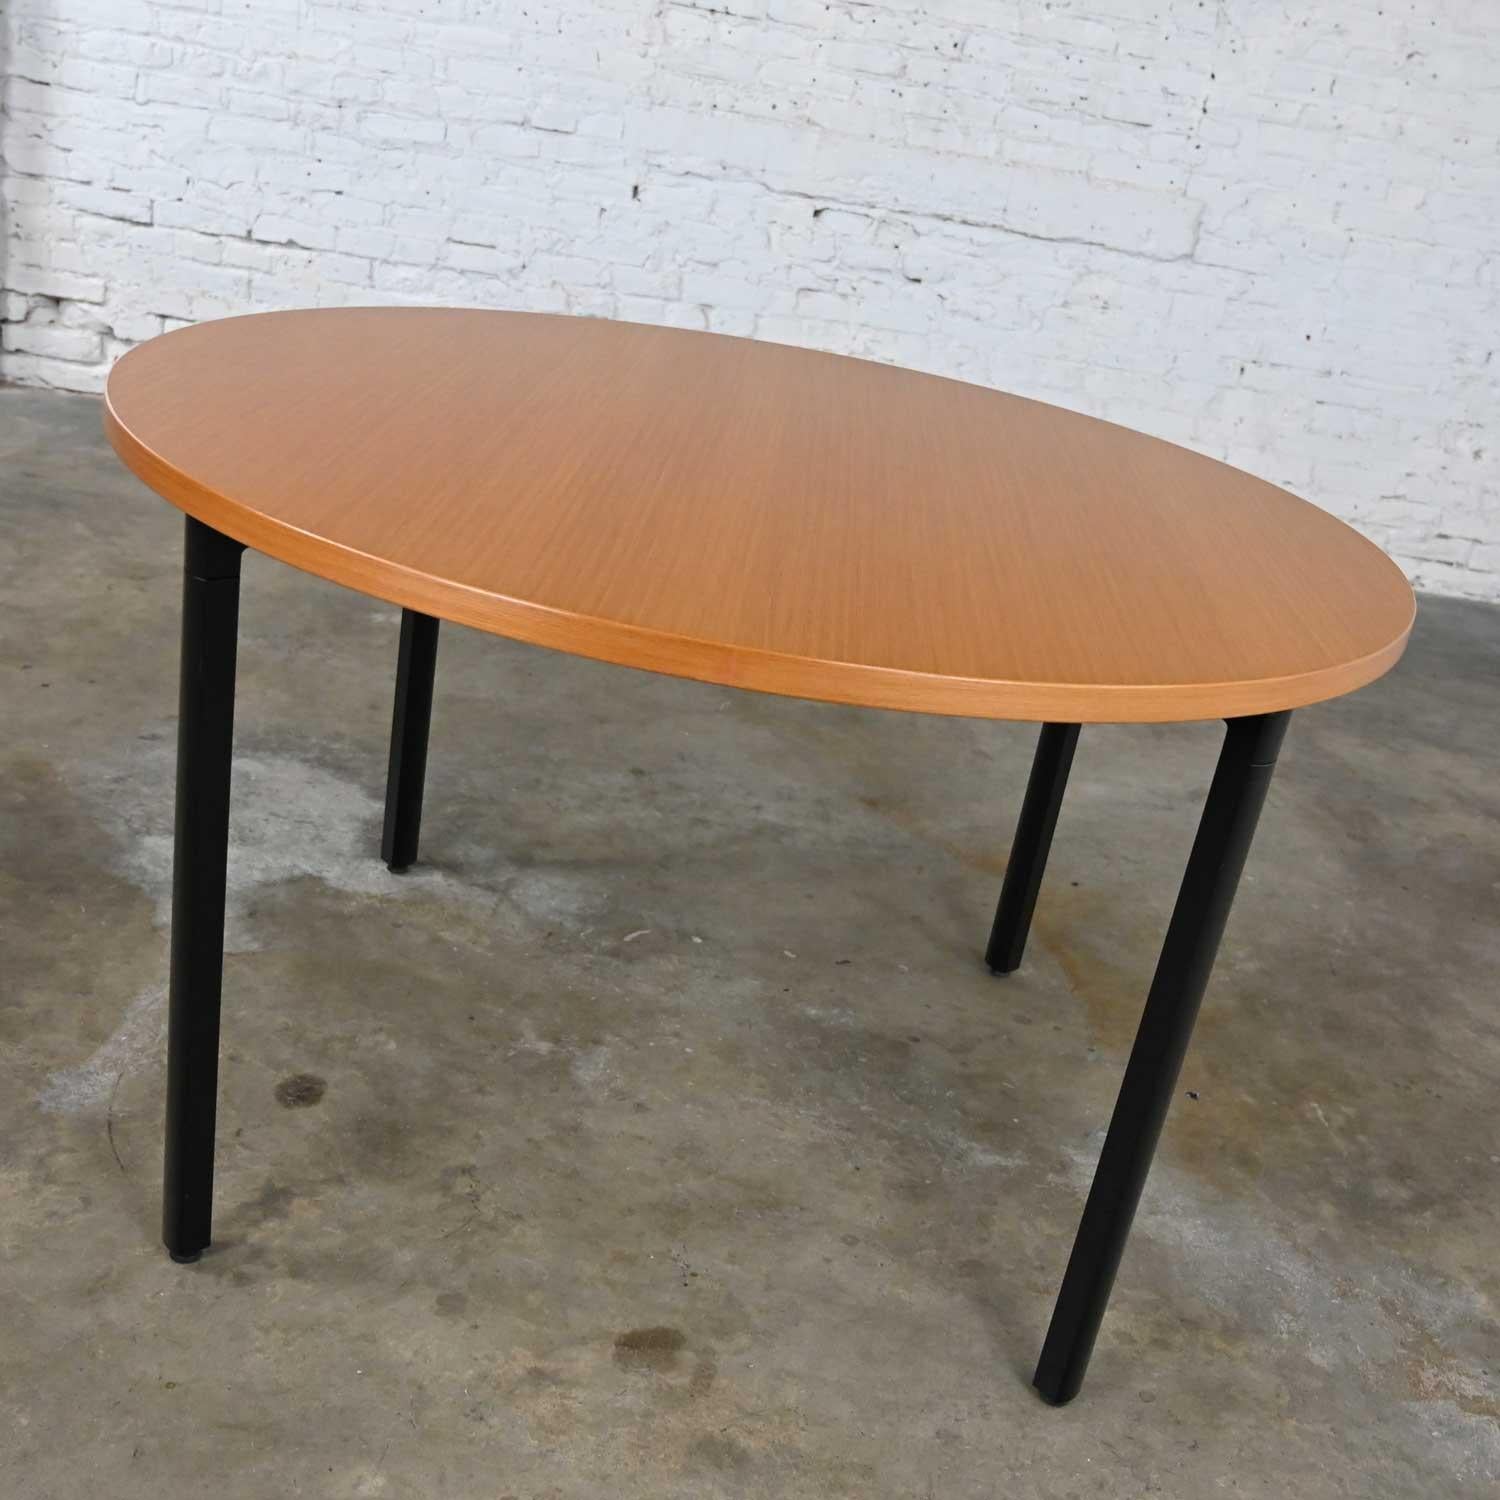 Chic Herman Miller Everywhere vintage modern table with natural oak wood veneer and rounded square black metal legs by Dan Grabowski. Beautiful condition, keeping in mind that this is vintage and not new so will have signs of use and wear. There are